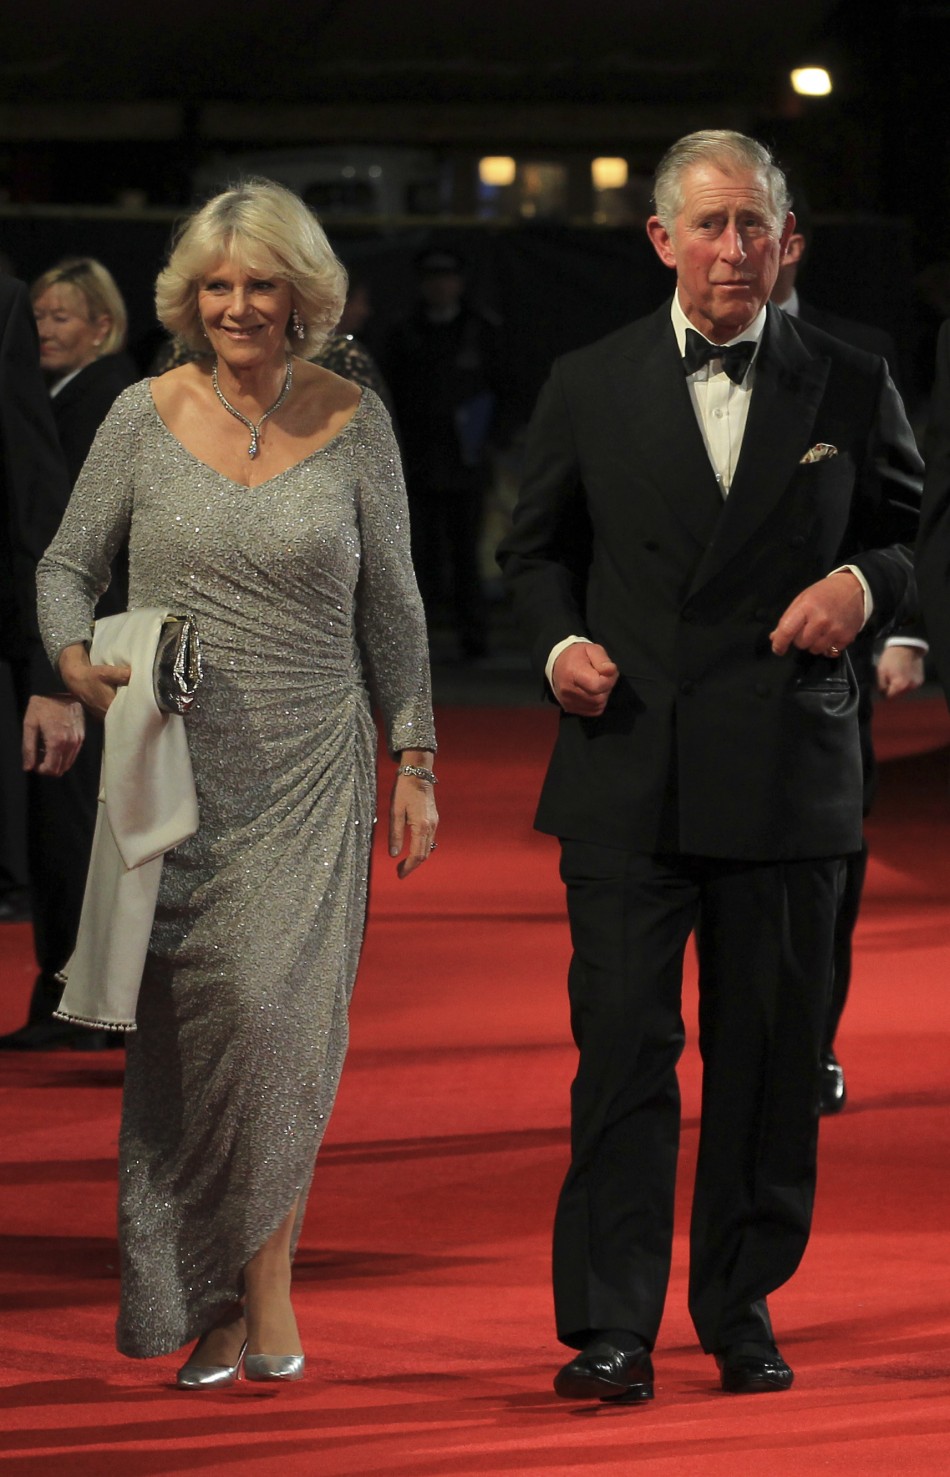 Britains Prince Charles and his wife Camilla, Duchess of Cornwall, arrive at The Royal Premiere of director Martin Scorseses film Hugo at the Odeon Leicester Square cinema in London